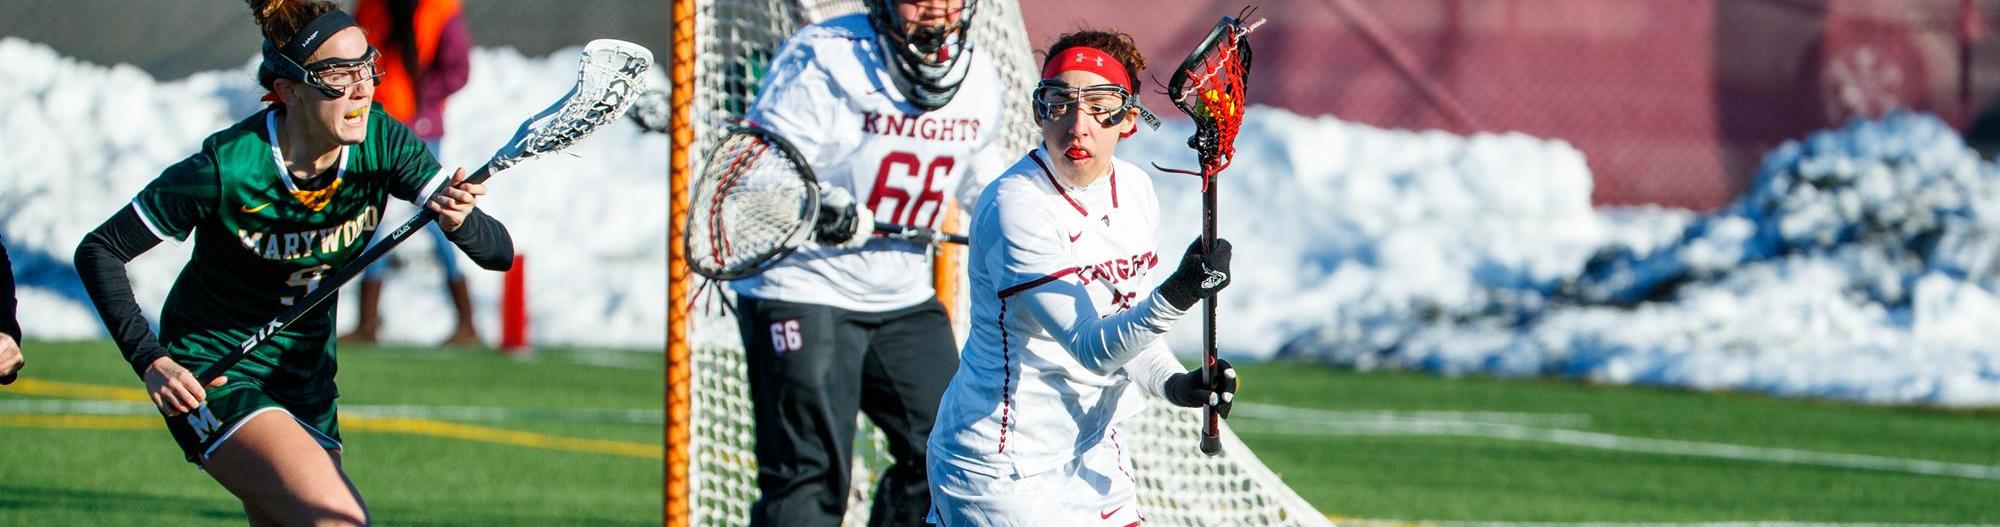 A lacrosse player for Arcadia controls the ball in front of the net vs Marywood